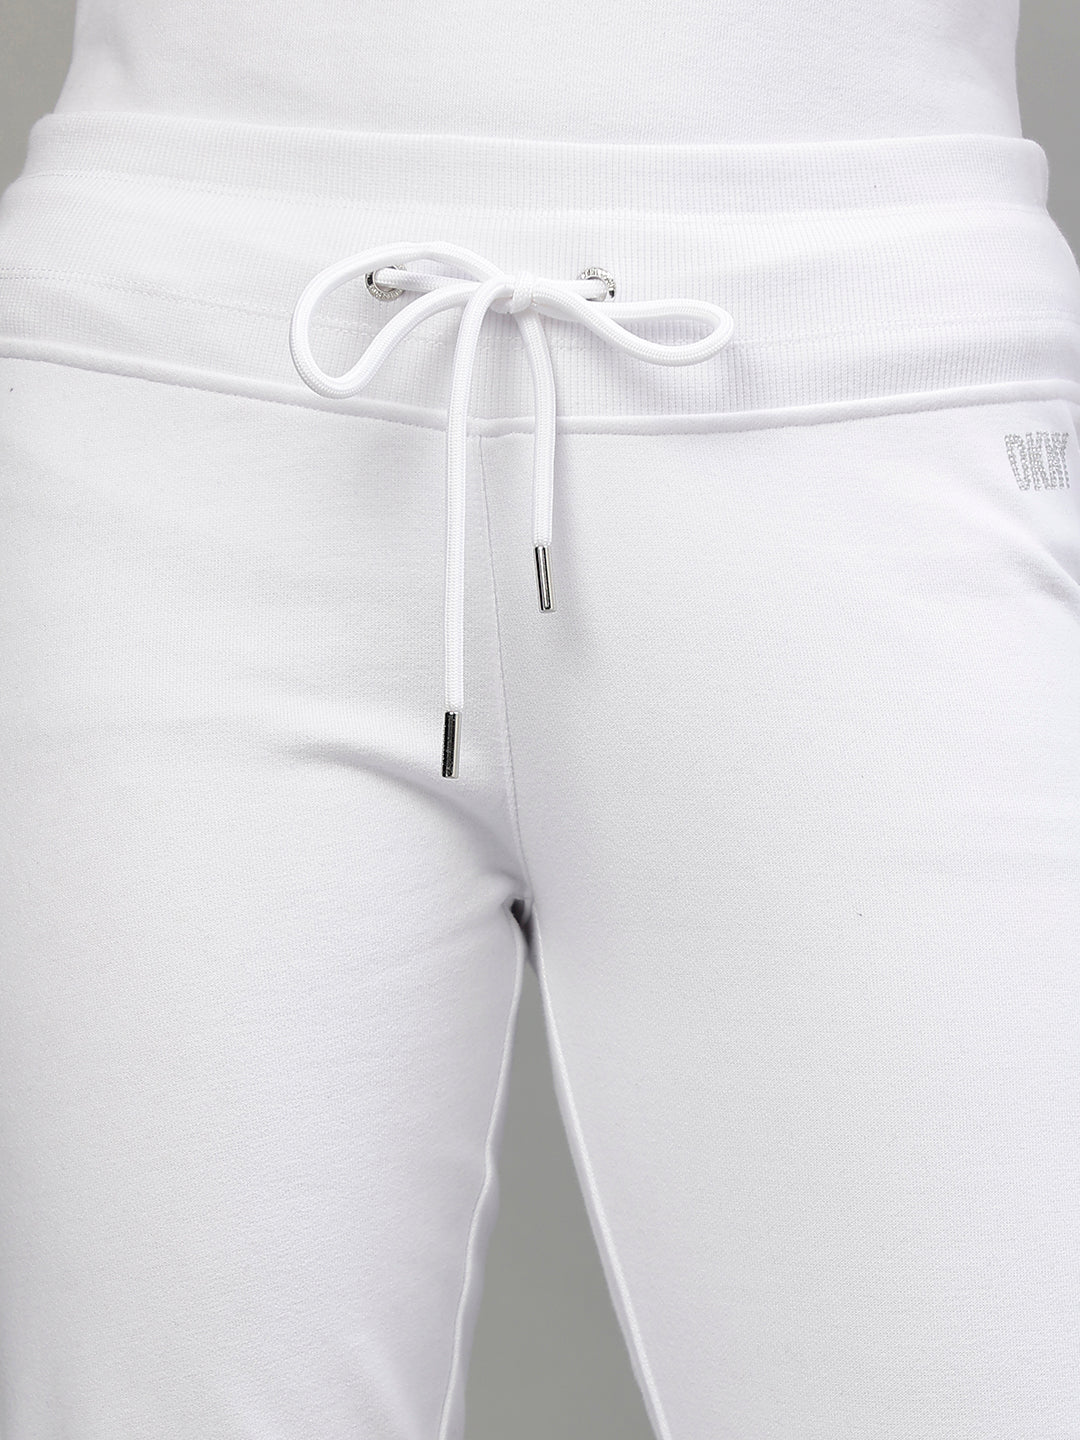 Dkny Women White Solid Regular Fit Trackpants